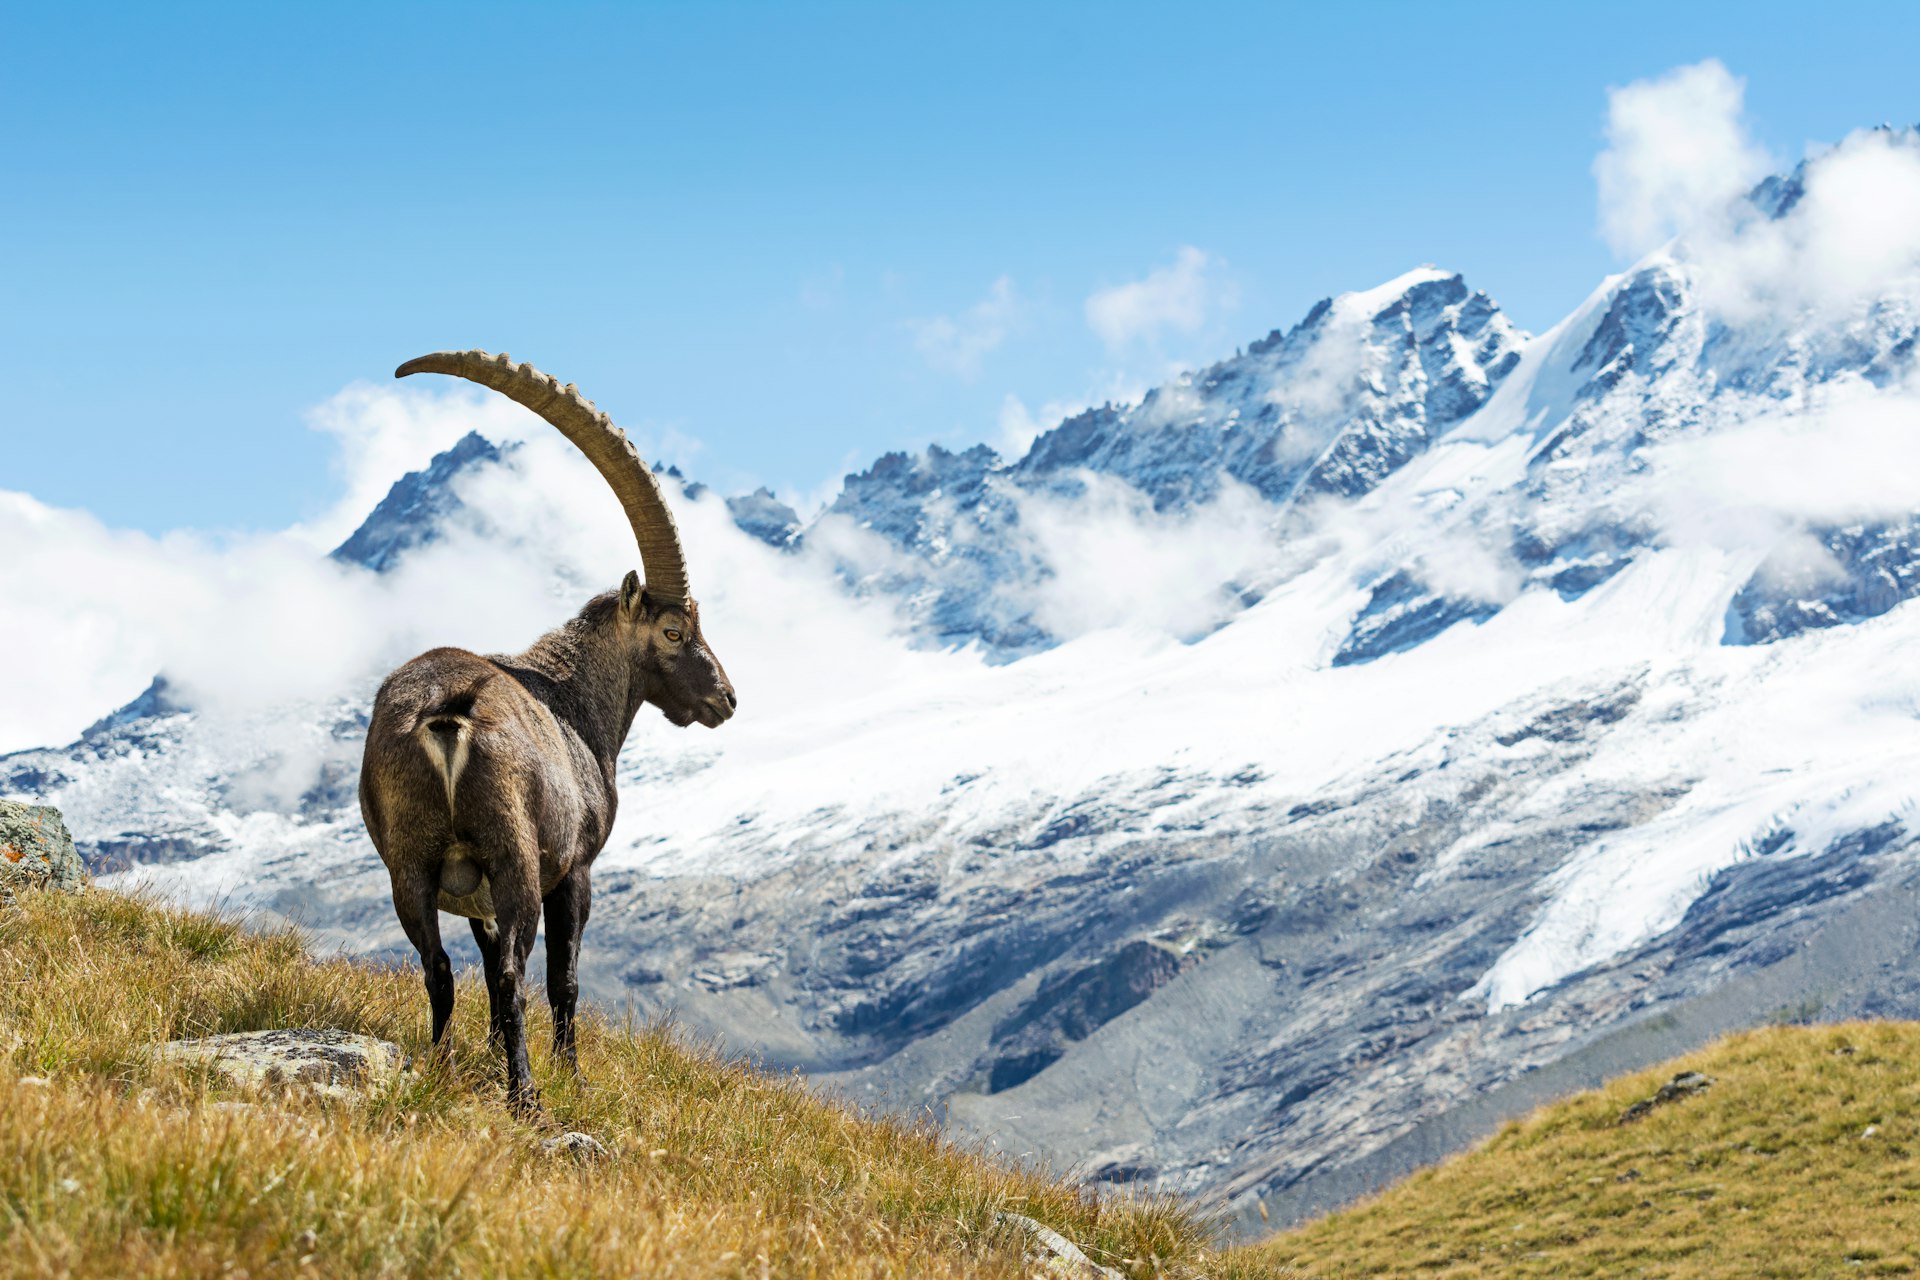 An Alpine Ibex stands on a grassy hill in Gran Paradiso National Park, Italy. In the background is a vast snowy mountain, which dwarfs the hill.